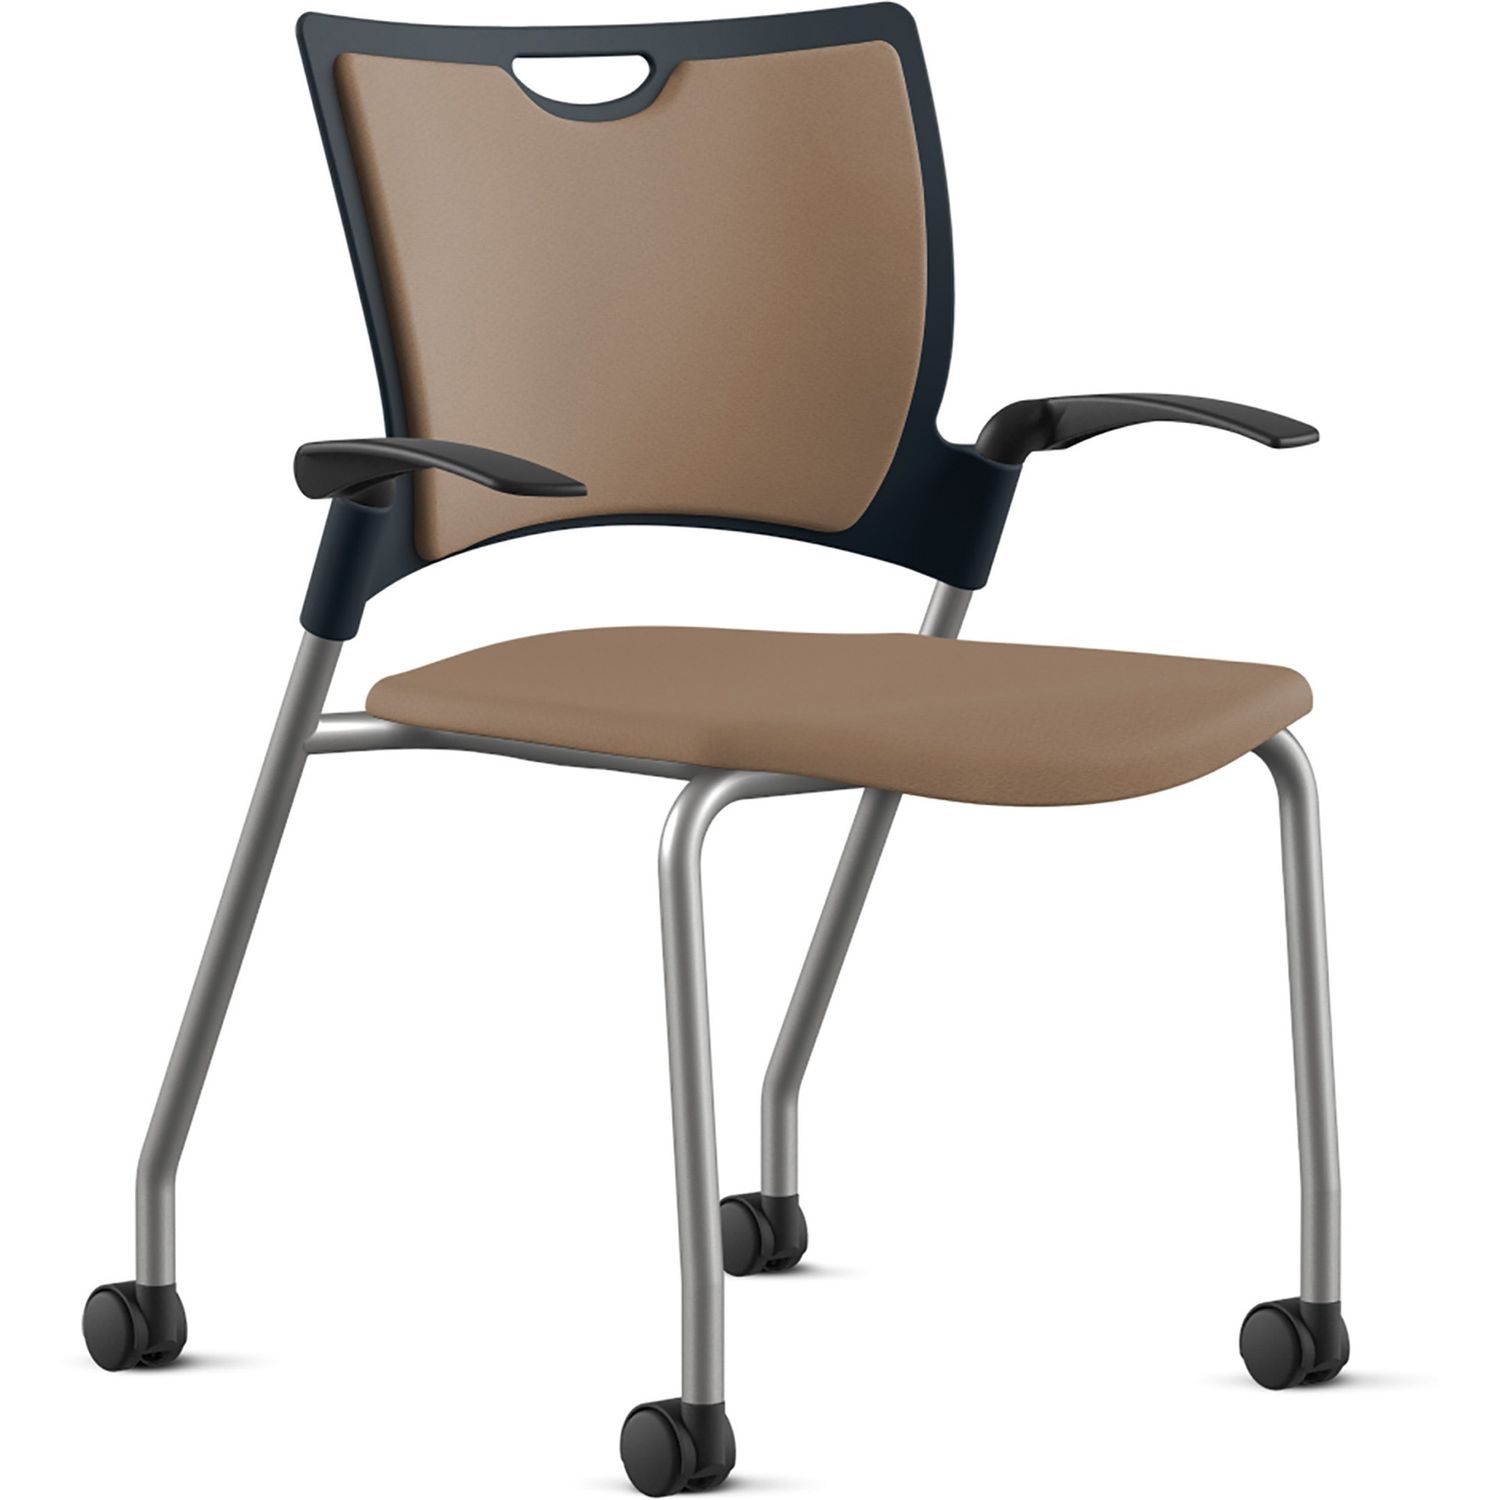 Bella Fabric Seat Mobile Stack Chair Fabric, Foam, Plastic Seat, Fabric, Plastic, Foam Back, Powder Coated, Silver Frame, Four-legged Base, Latte, 1 Each